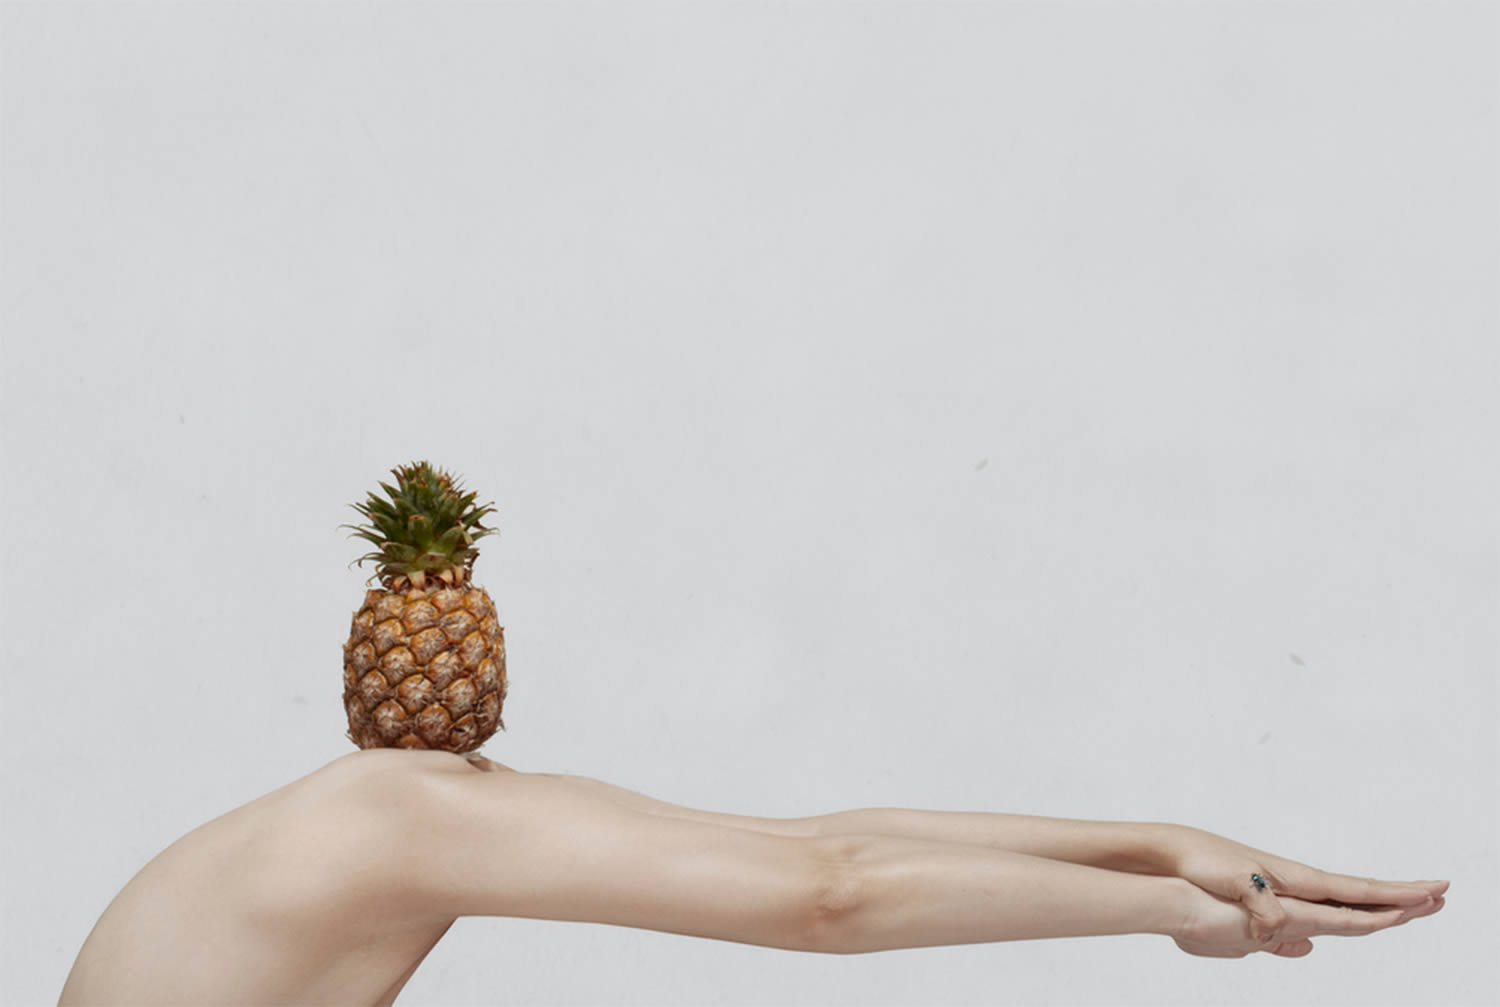 pineapple head, photo by yung cheng lin